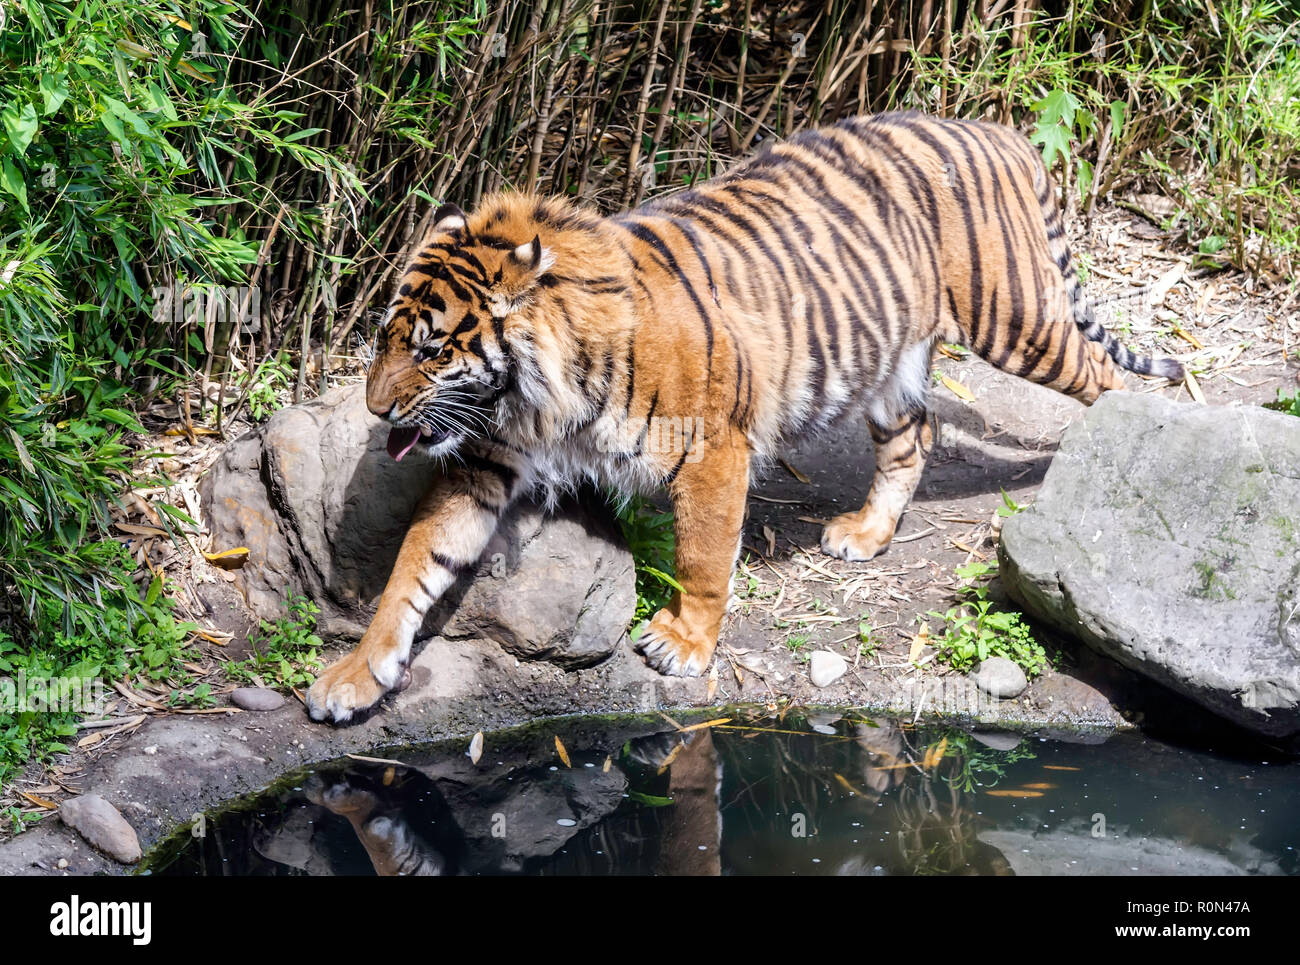 Sumatran tiger (Panthera tigris sondaica) walking by the pond with its tongue out. The tiger has a muscular body and is one of only a few striped cat  Stock Photo